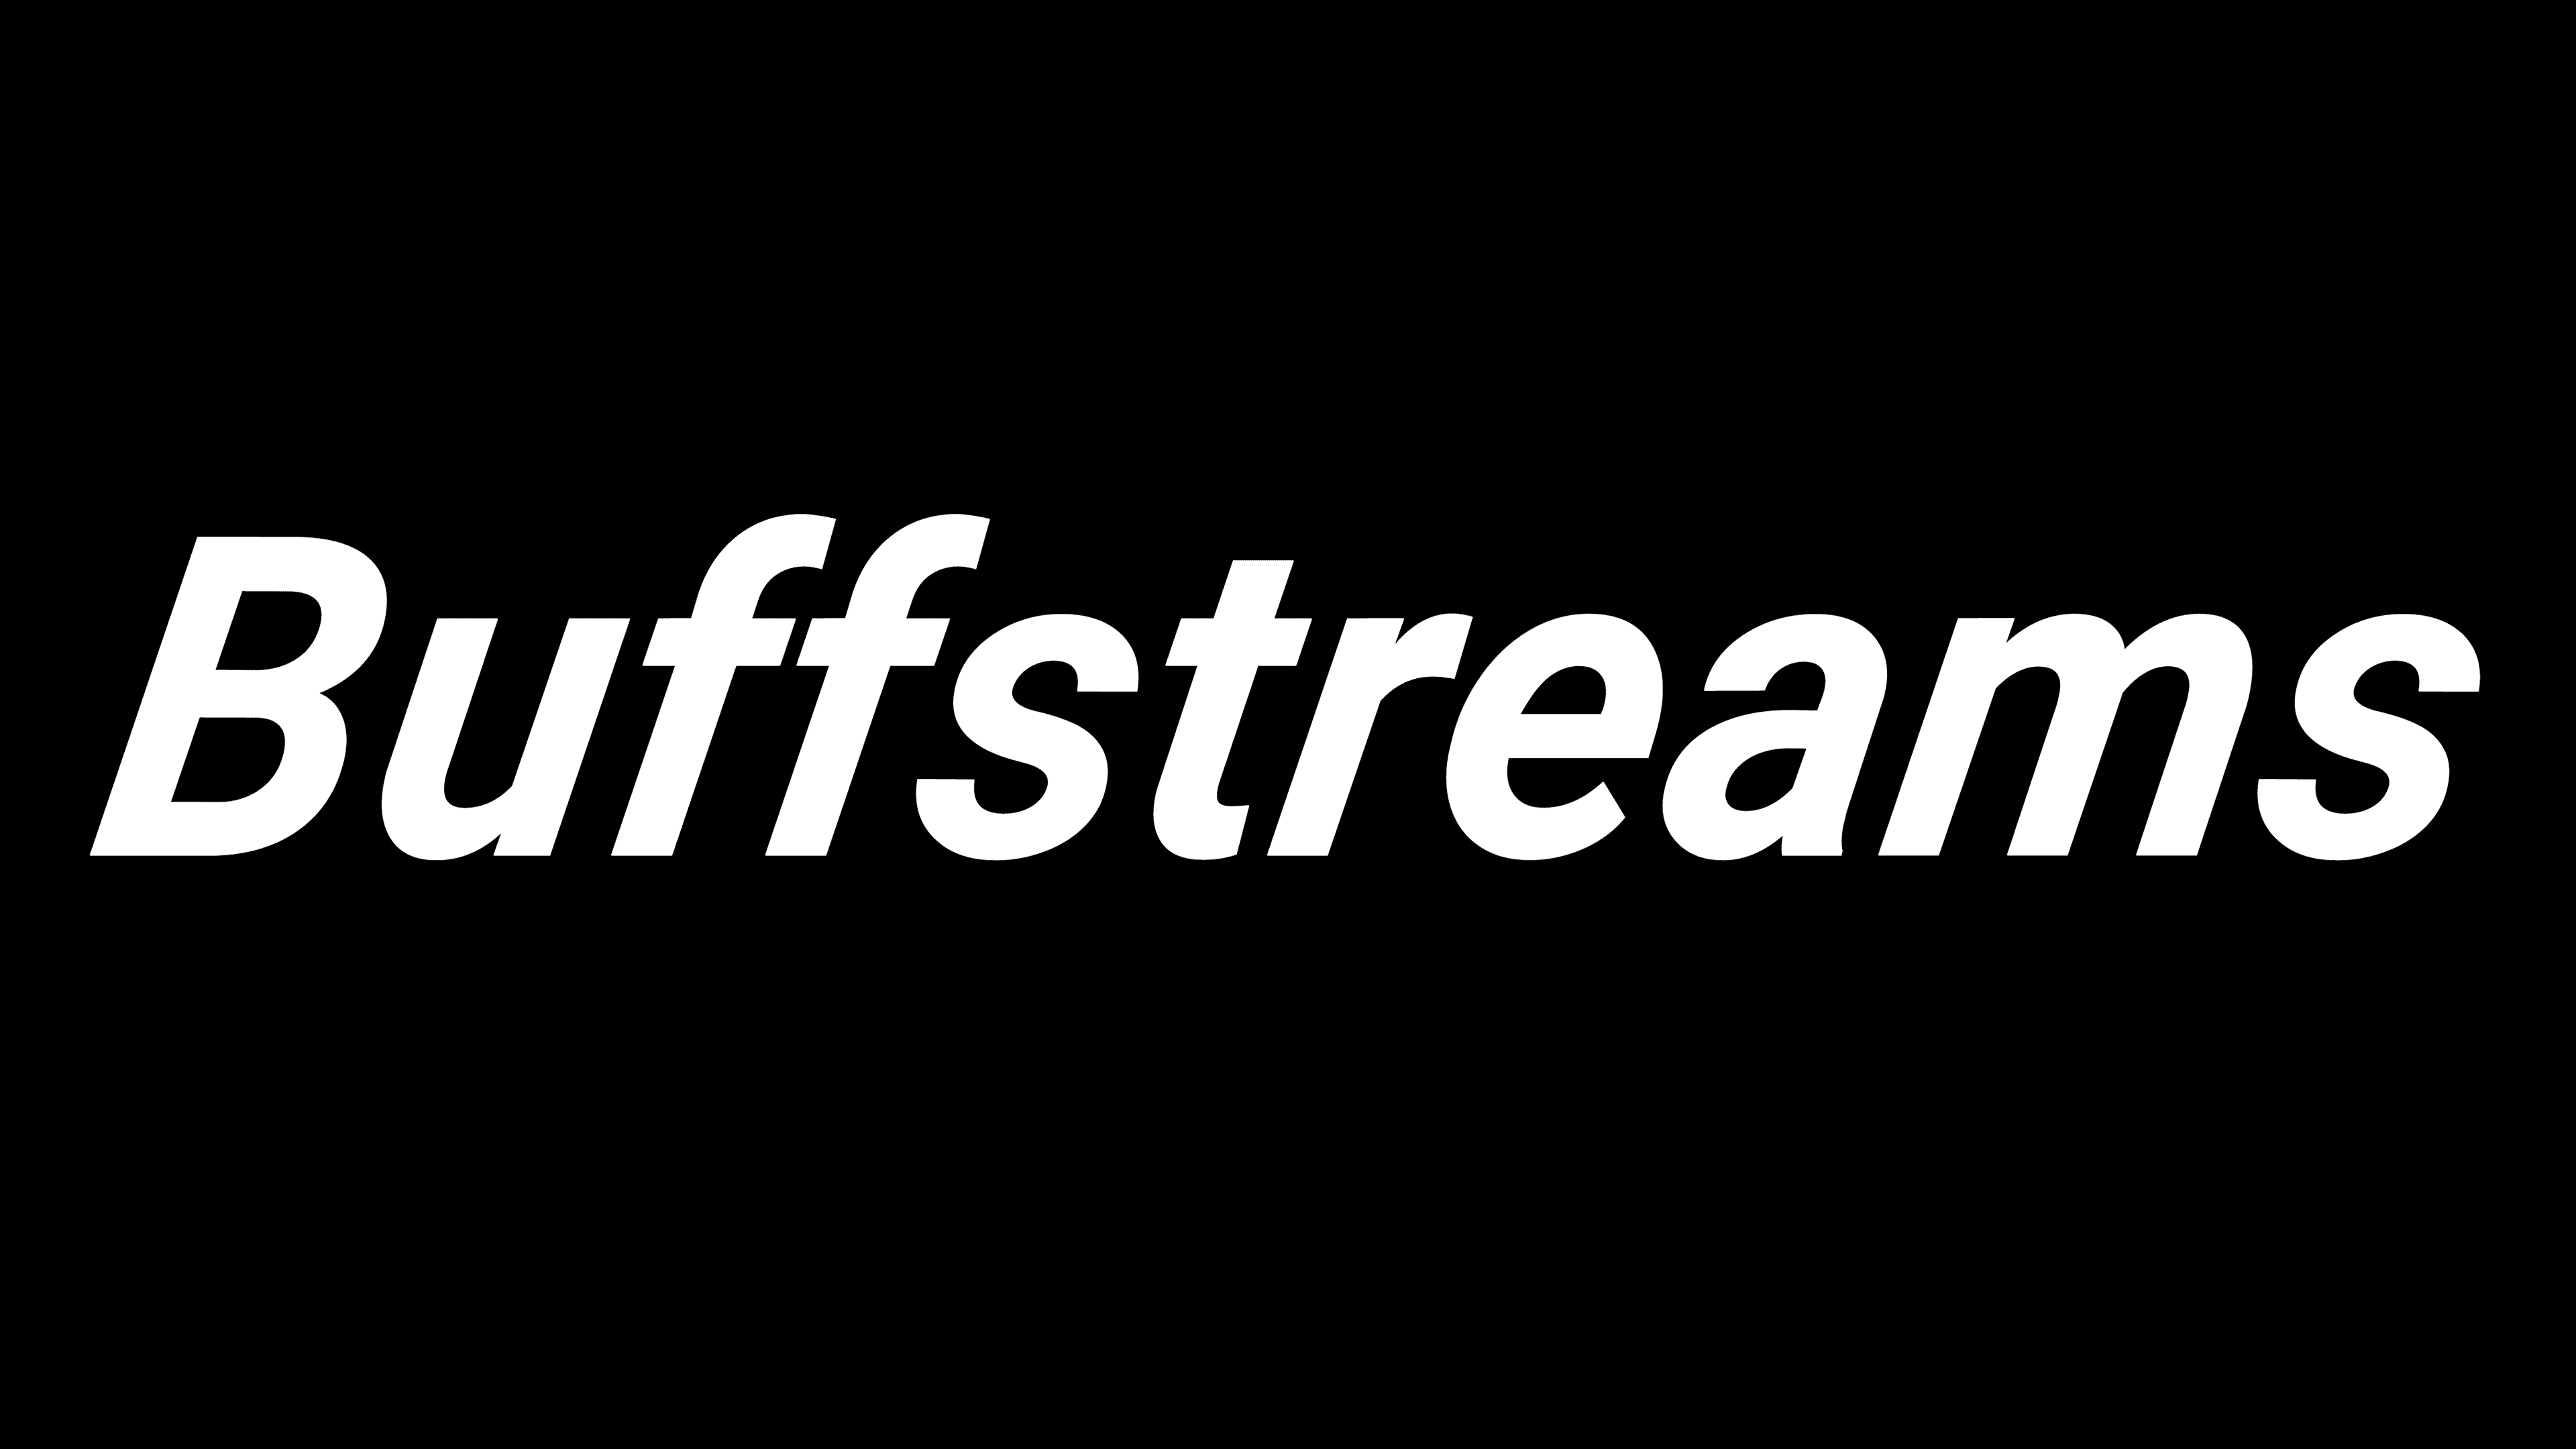 Buffstreamz Logo, symbol, meaning, history, PNG, brand